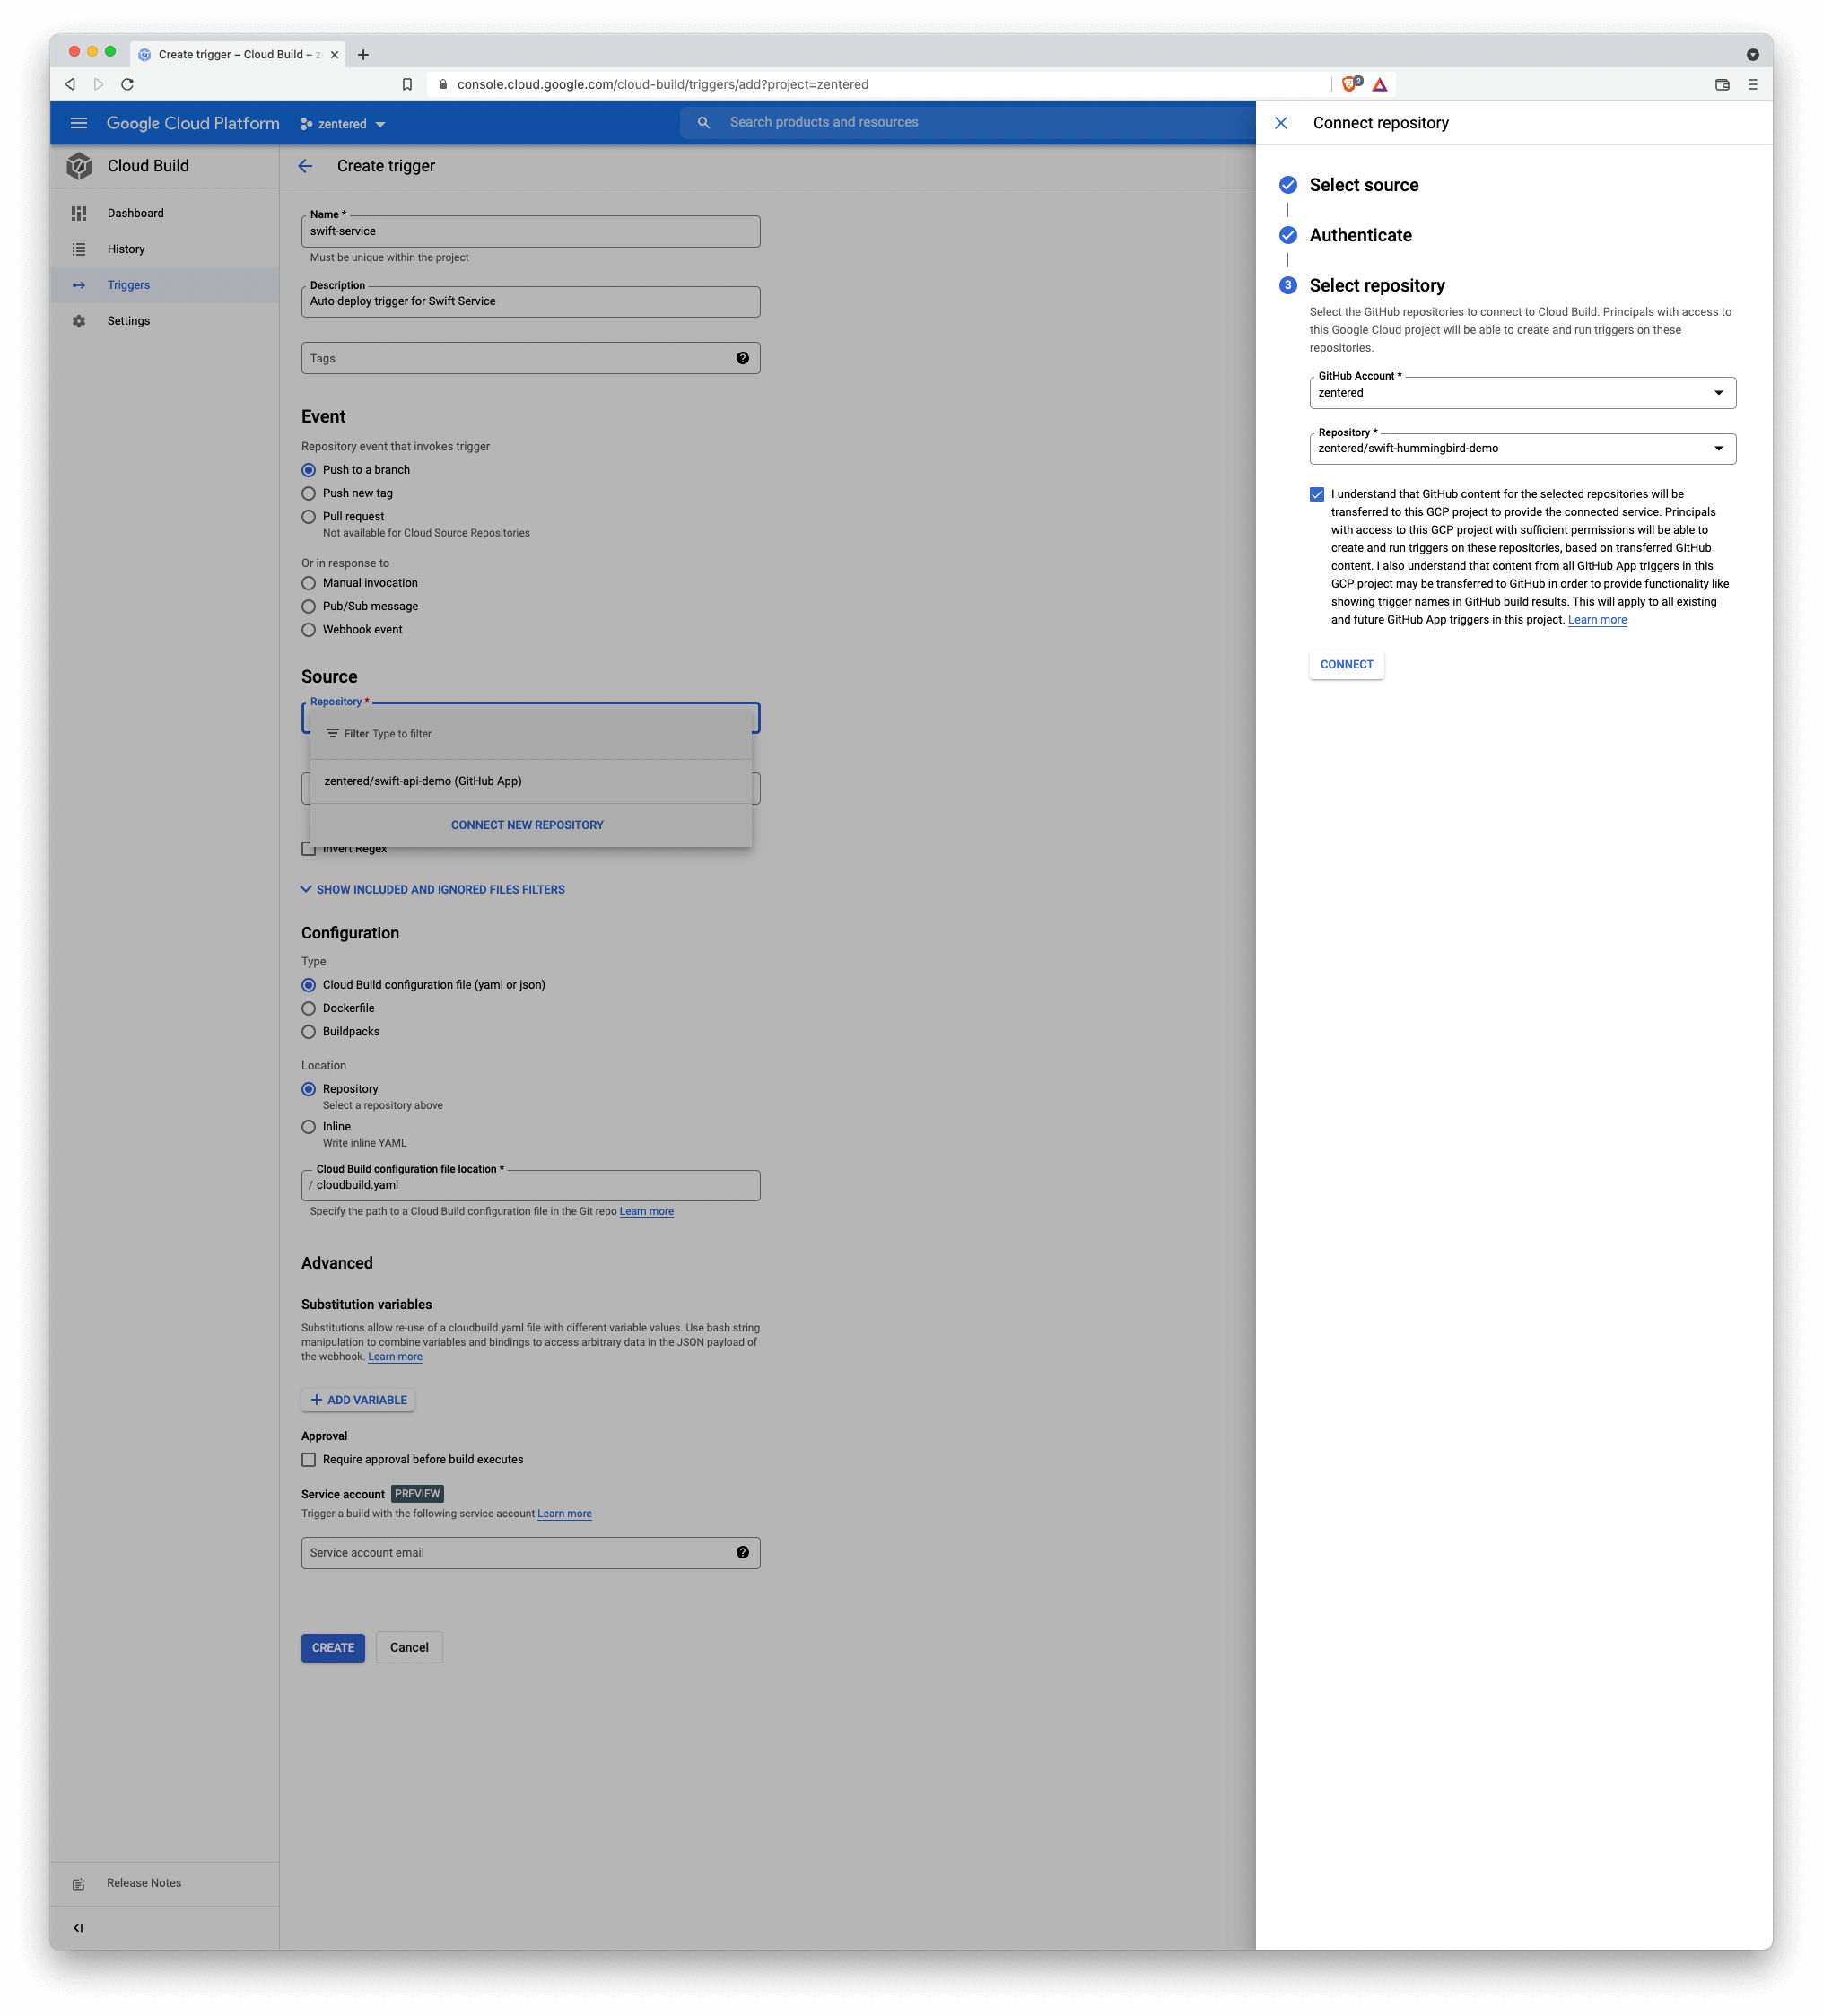 cloud build trigger settings and how to connect a code repository